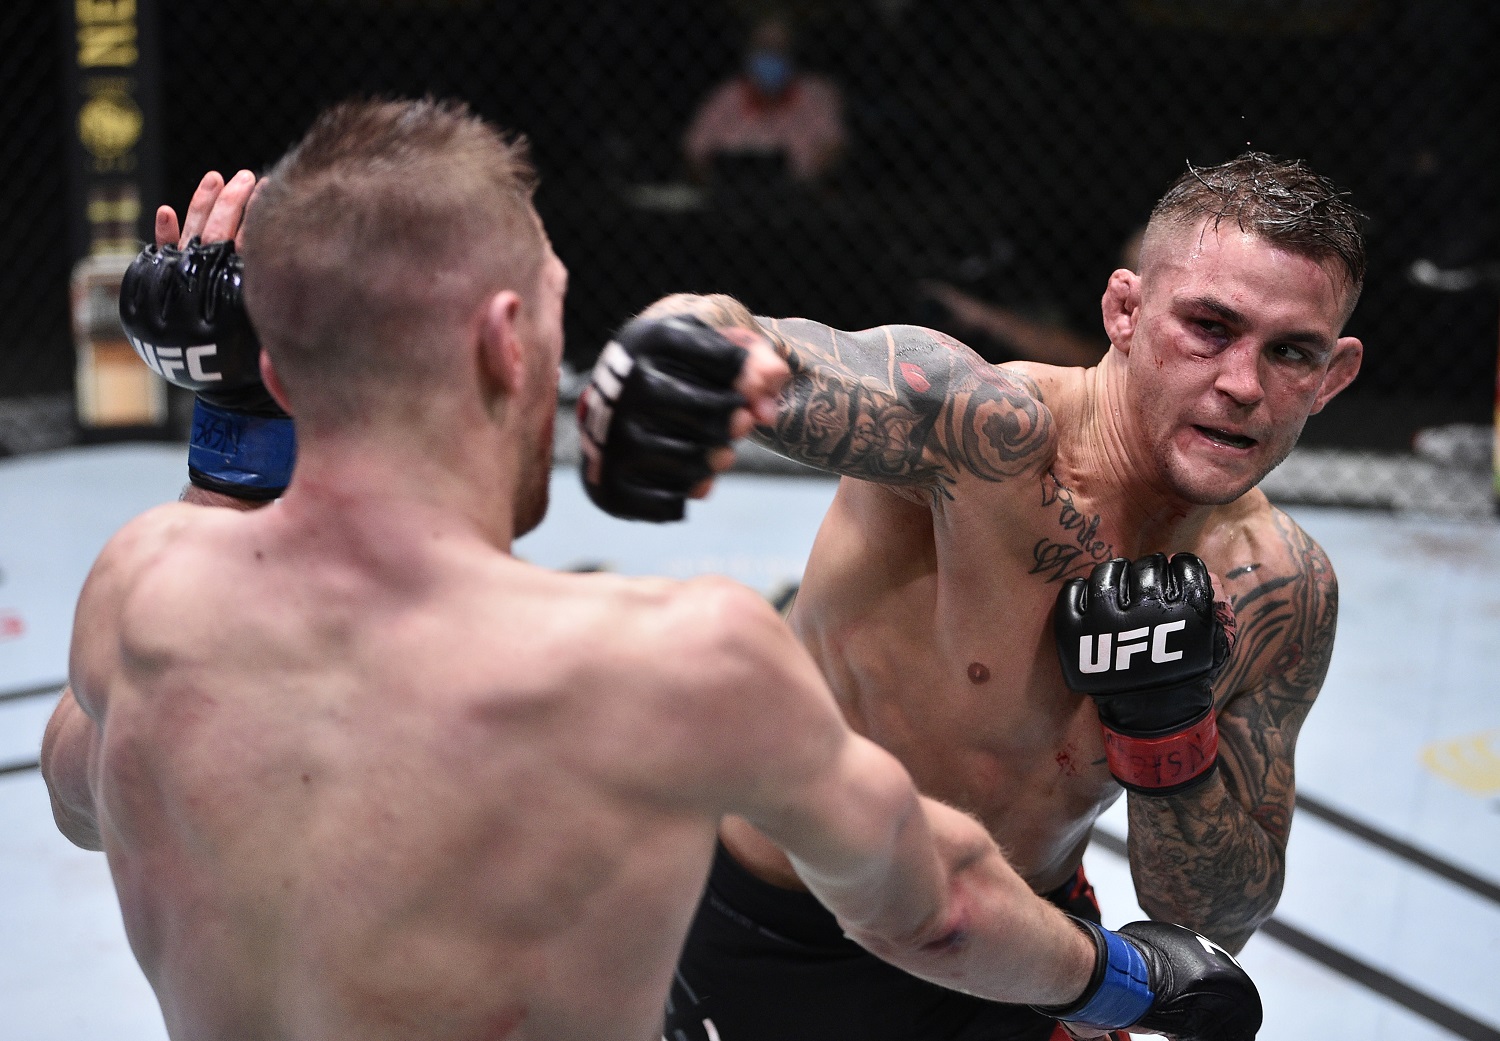 Conor McGregor Opponent Dustin Poirier Stages His Biggest Fights Outside the Octagon